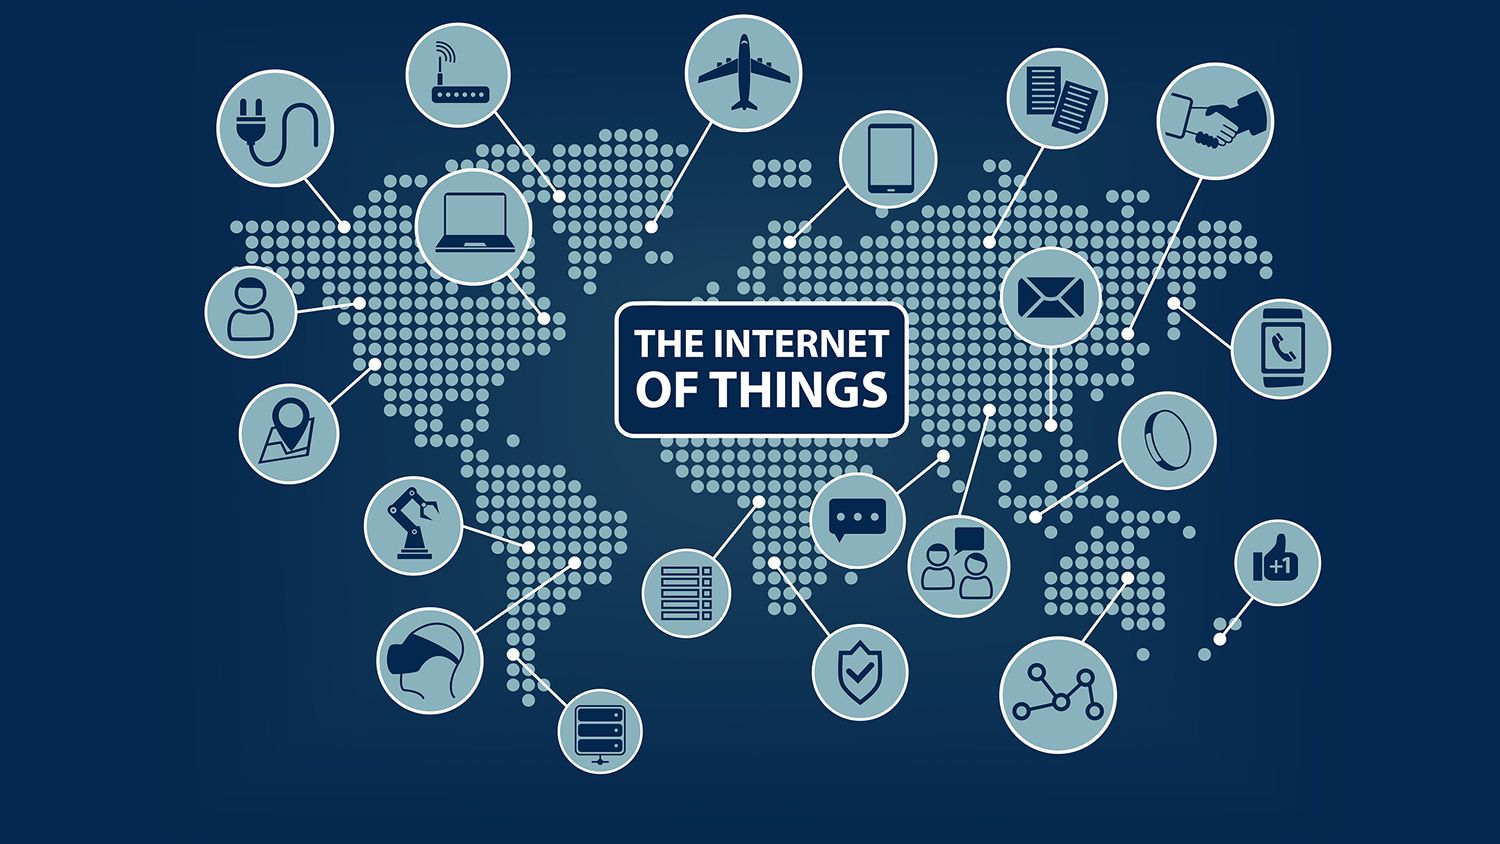 Internet Of Things - The Revolution Of Higher Education